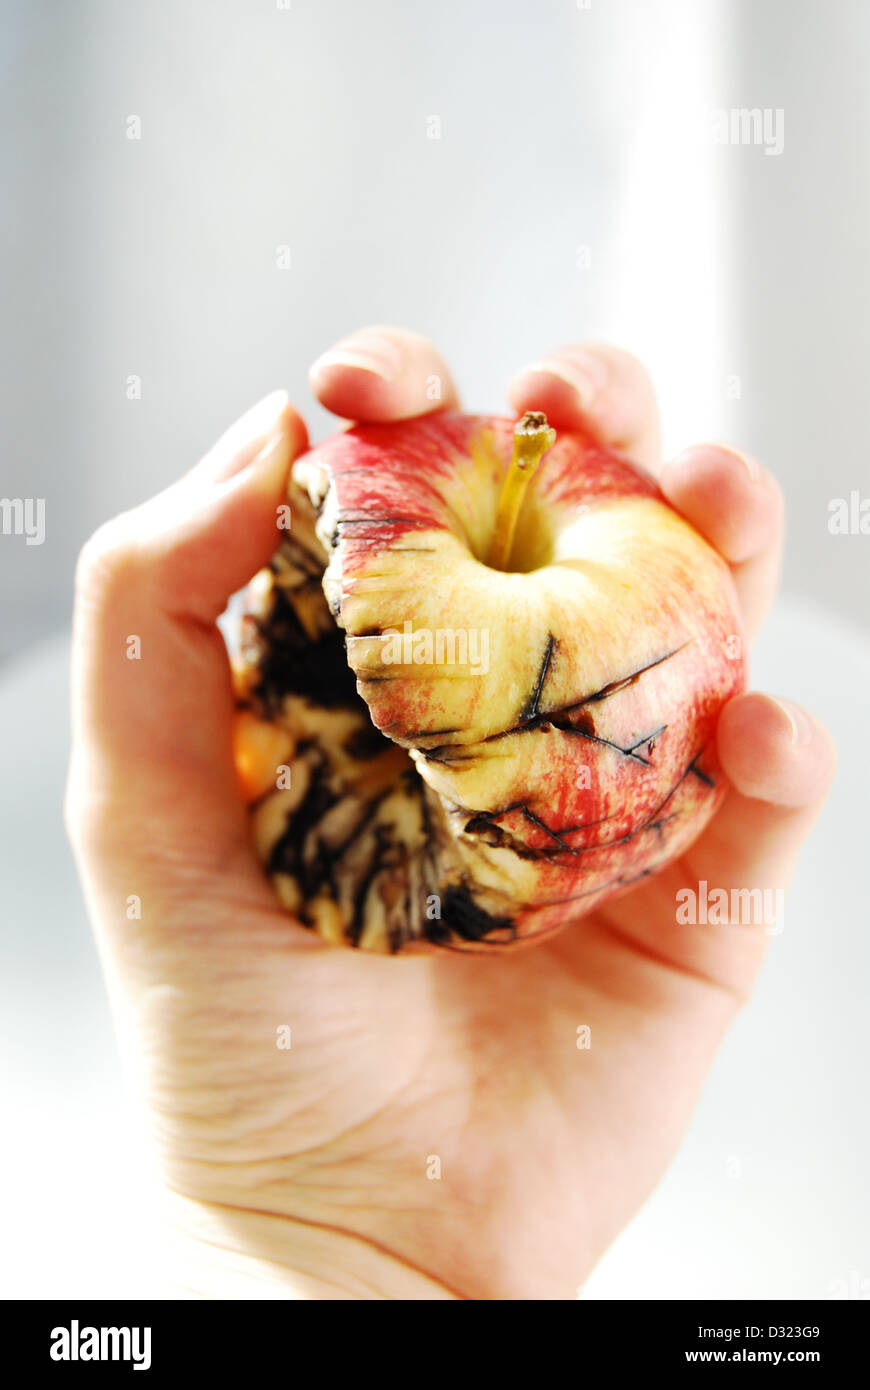 A red and yellow apple on a white background, held by a hand bitten with black cracks and mold showing decay and rotting fruit Stock Photo